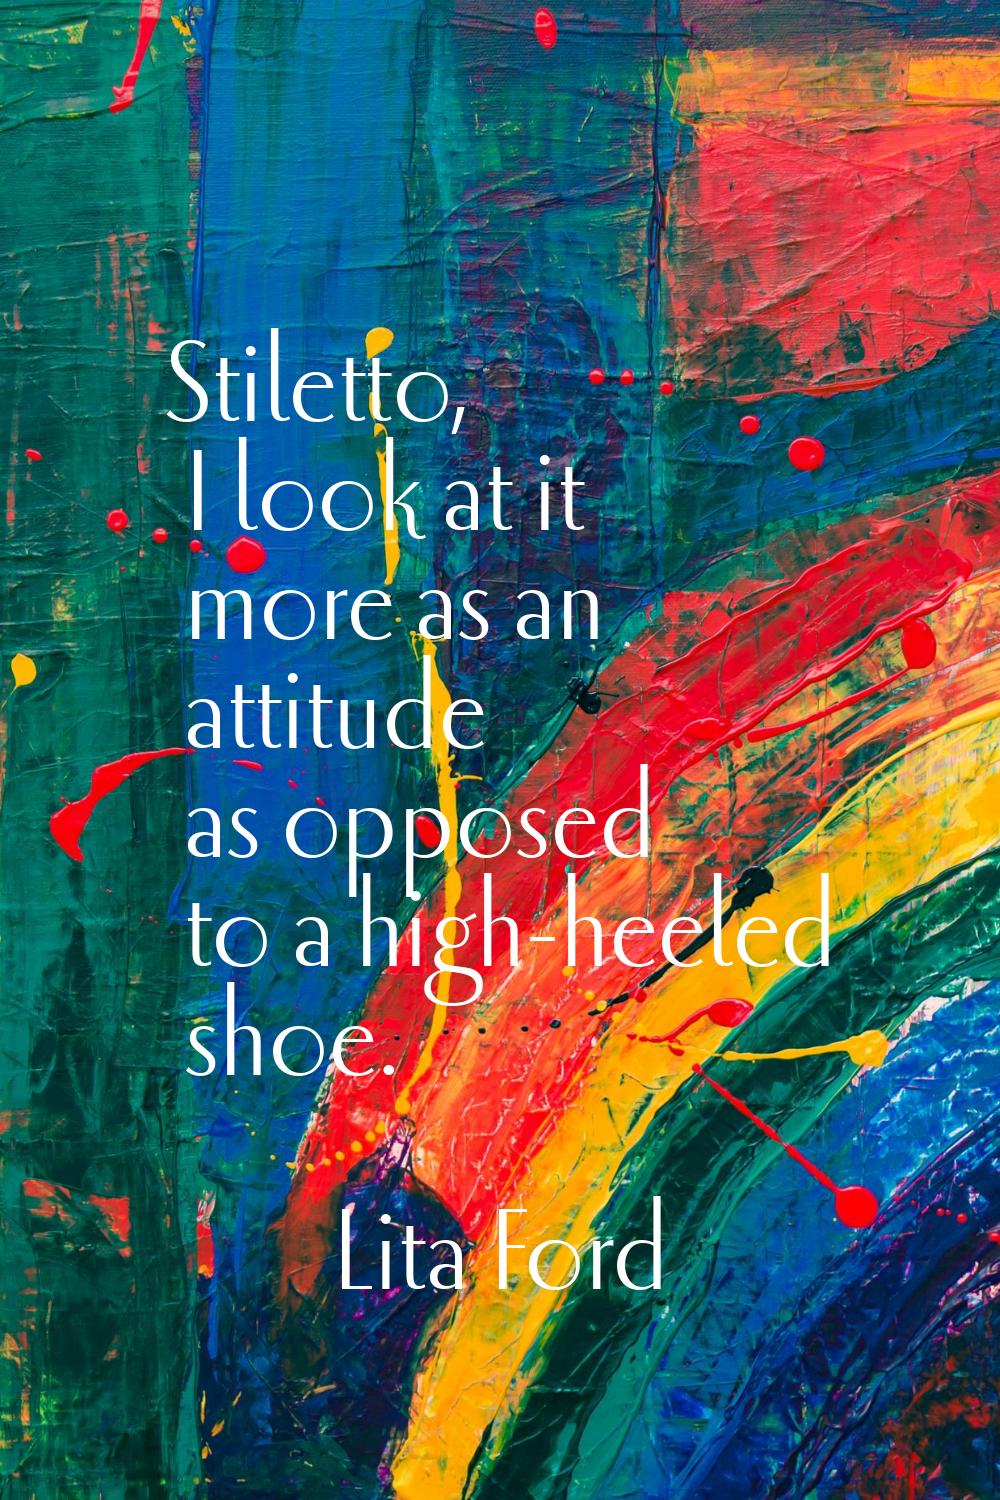 Stiletto, I look at it more as an attitude as opposed to a high-heeled shoe.